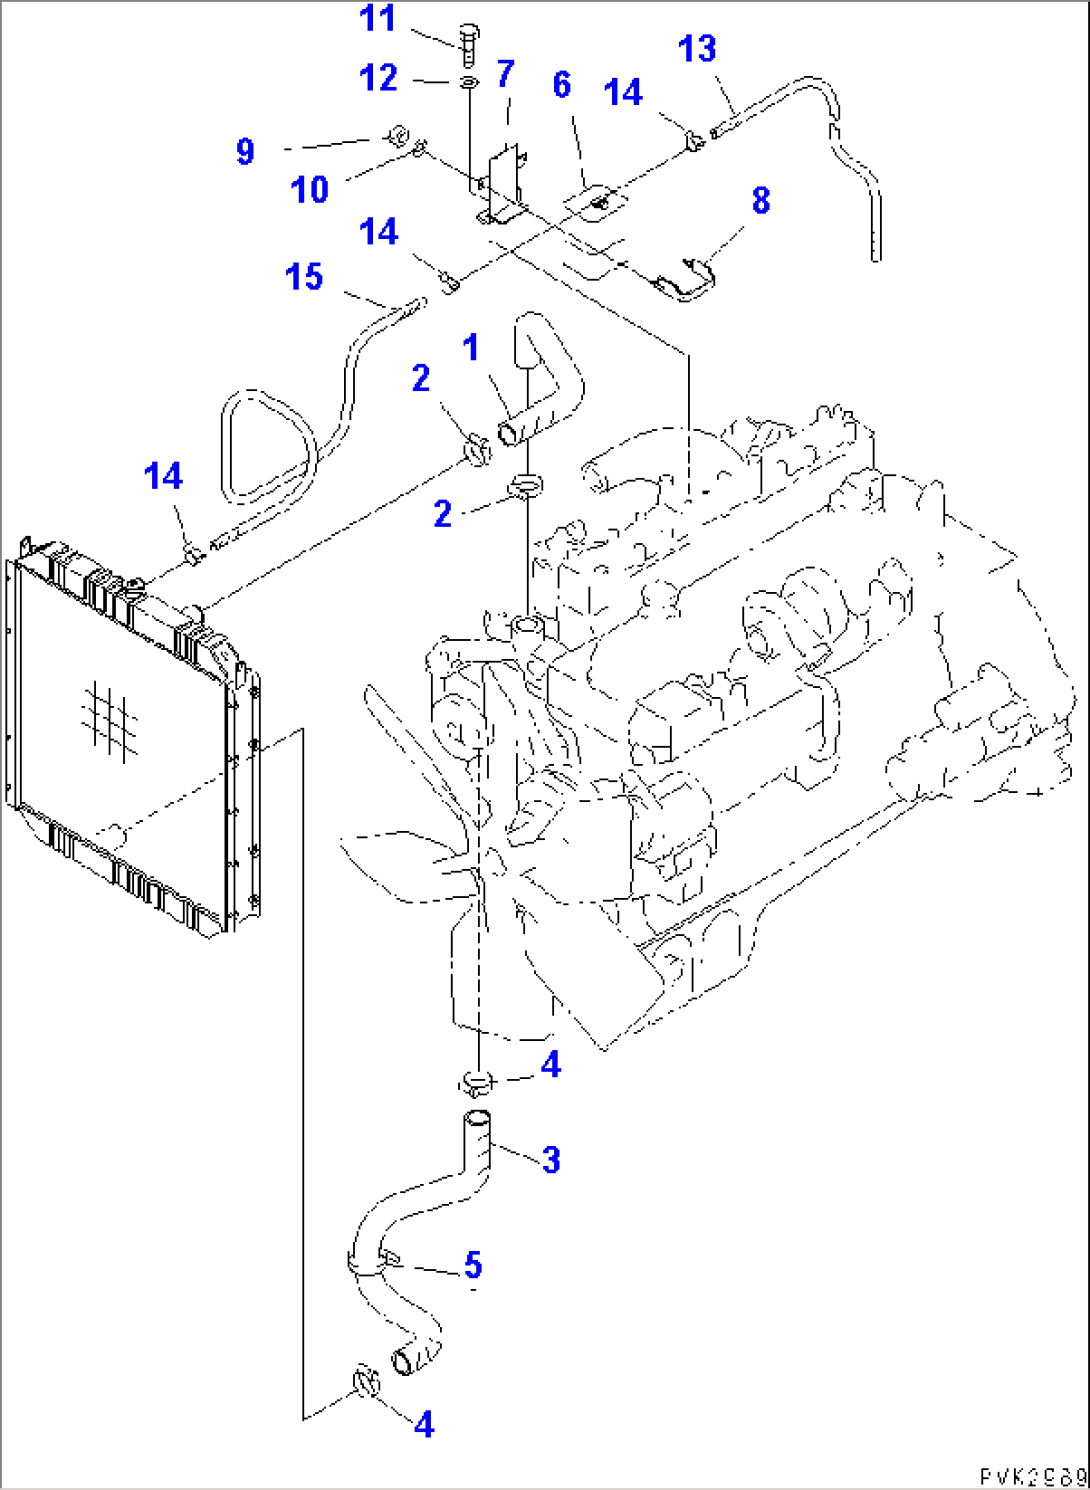 COOLING (RADIATOR PIPING AND SUB TANK)